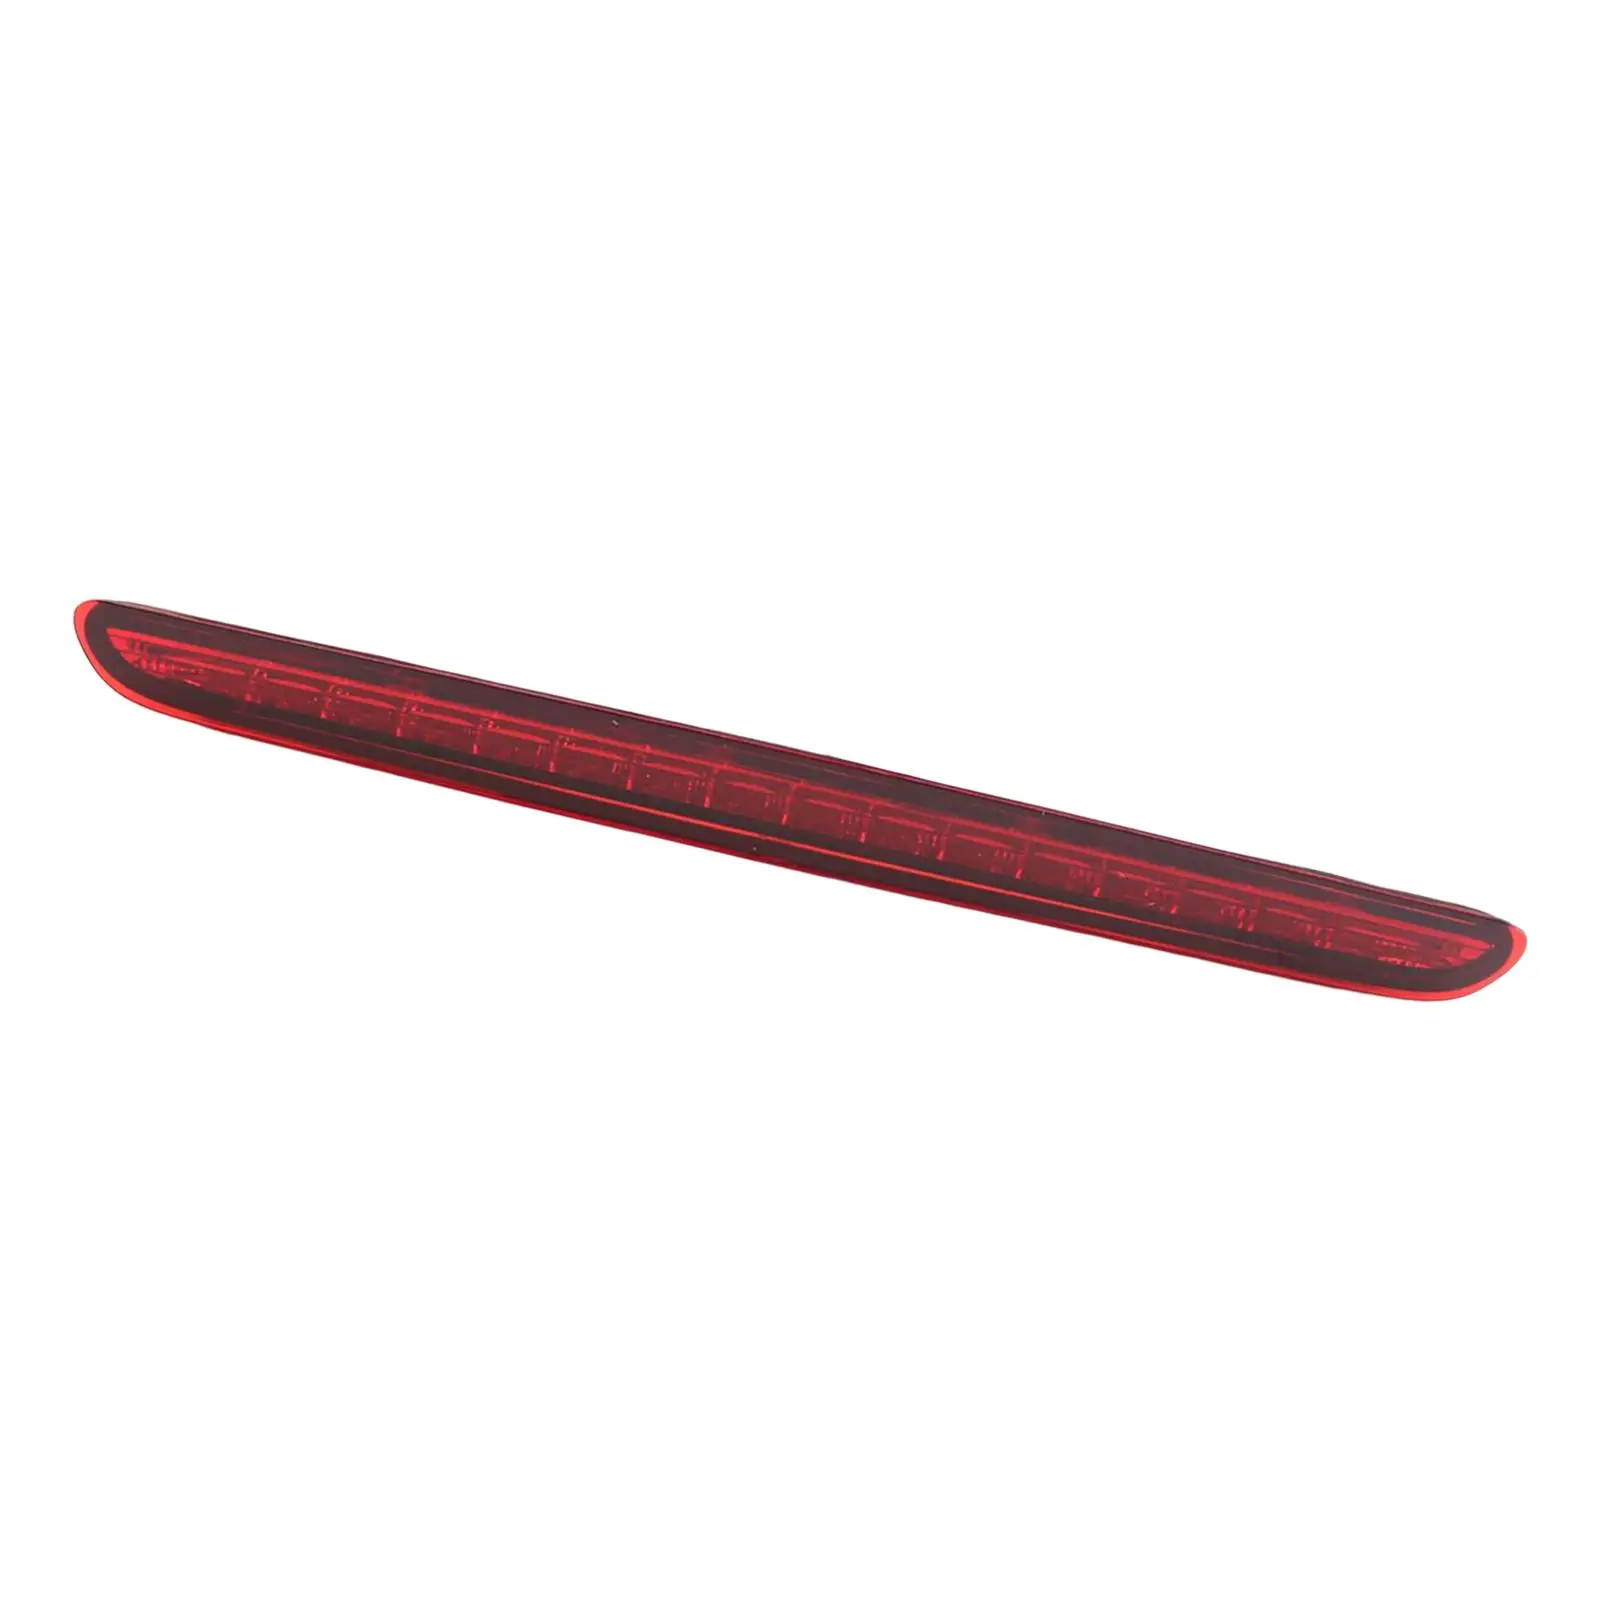 Brake Light LED Rear Center Stop Lamp Bar Strip for 3 Series E93  Facelift improve your car's appearance and performance.